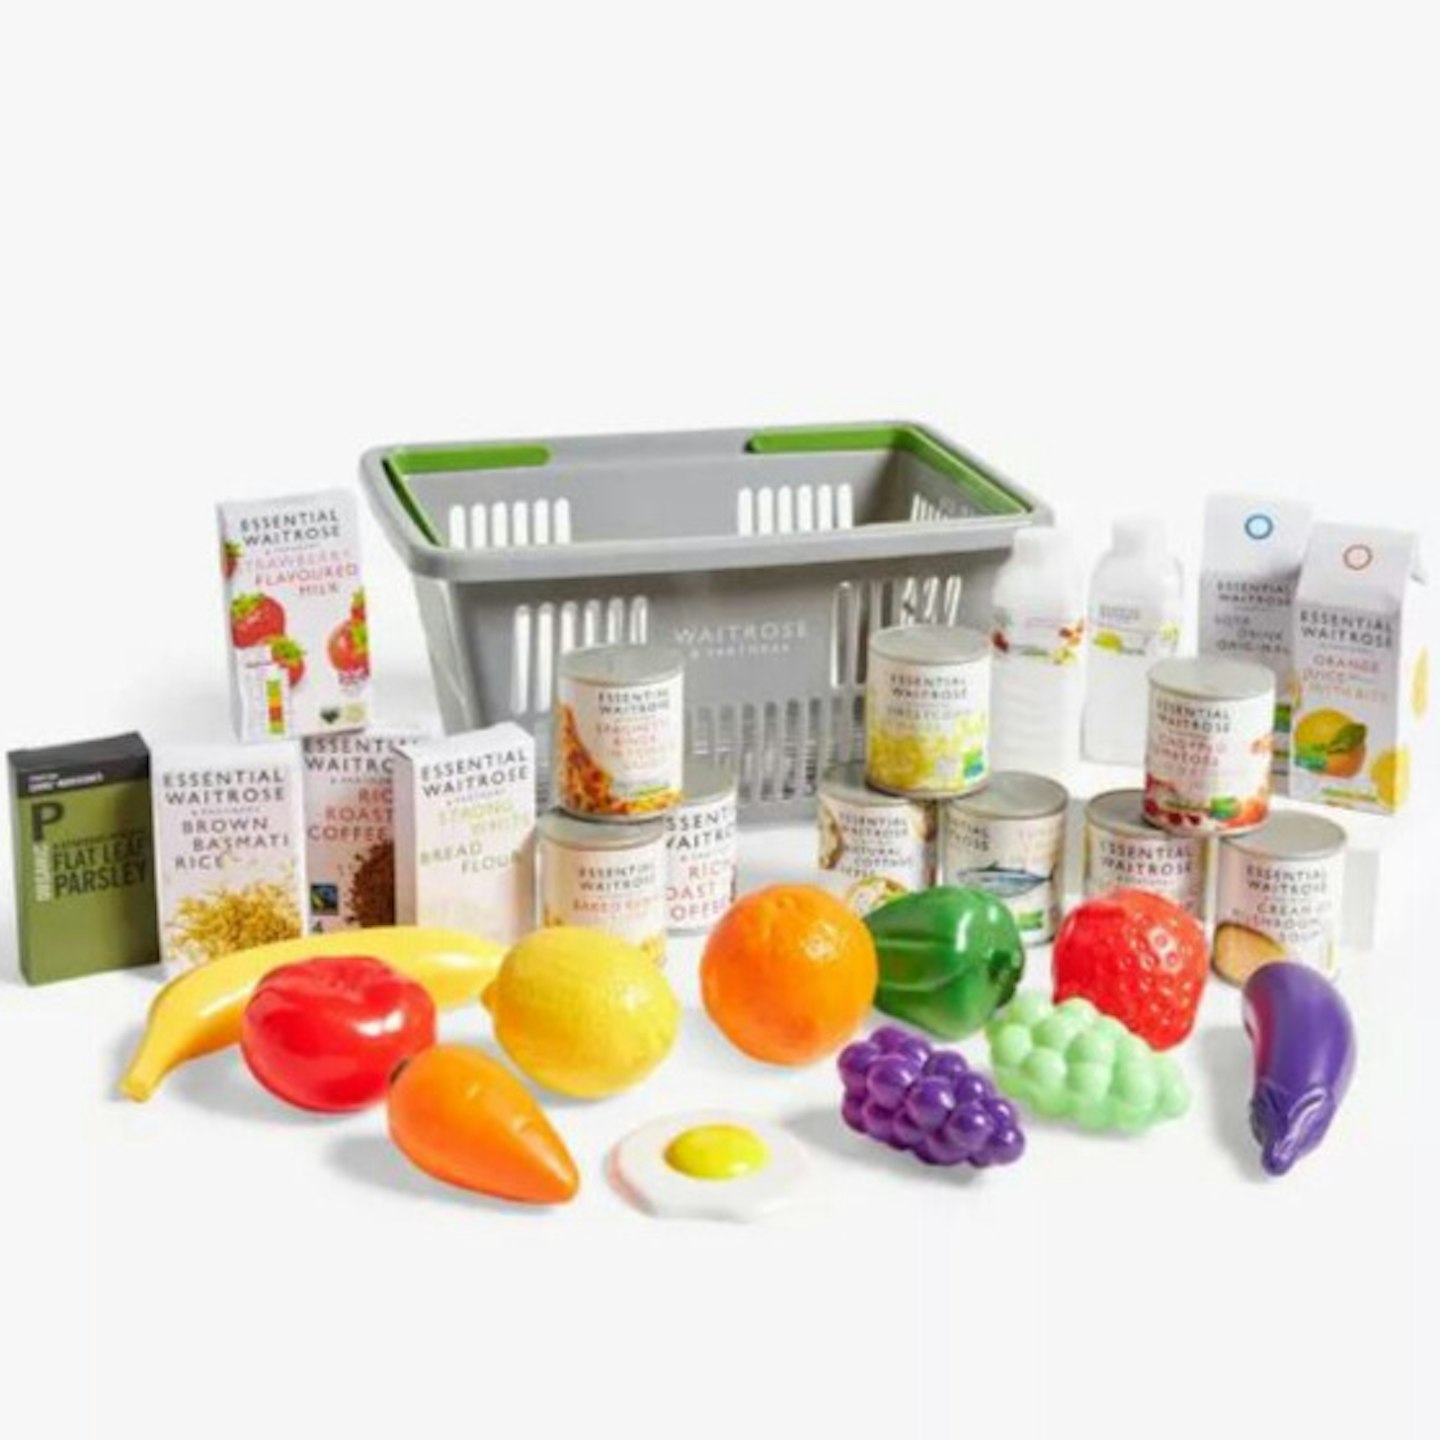 Waitrose branded toy grocery basket with toy food packets and tins